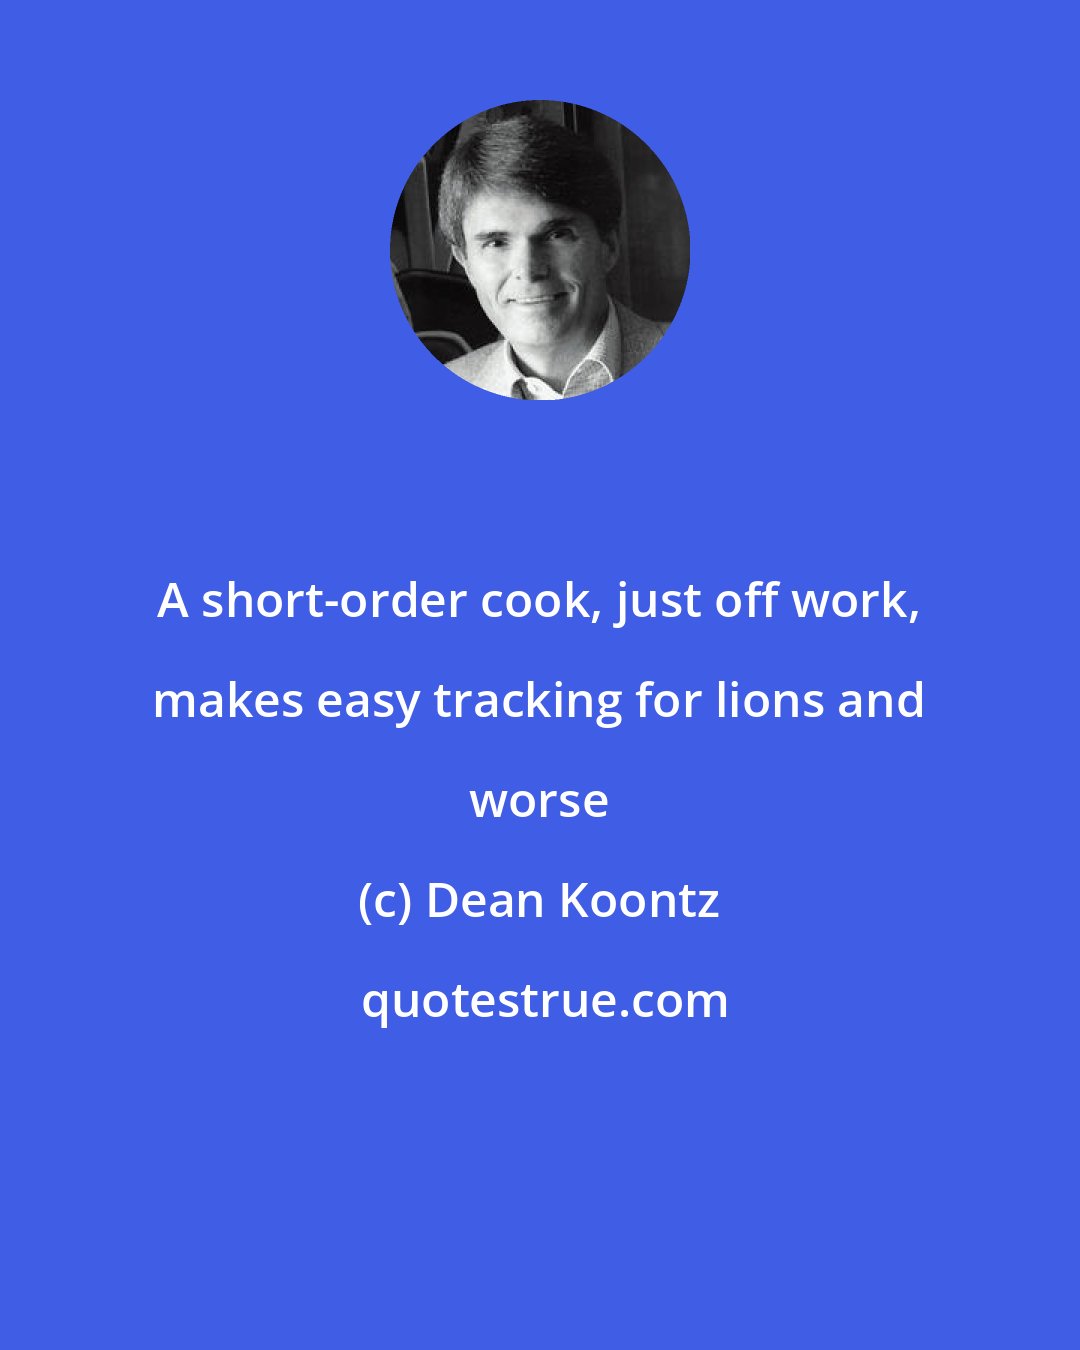 Dean Koontz: A short-order cook, just off work, makes easy tracking for lions and worse